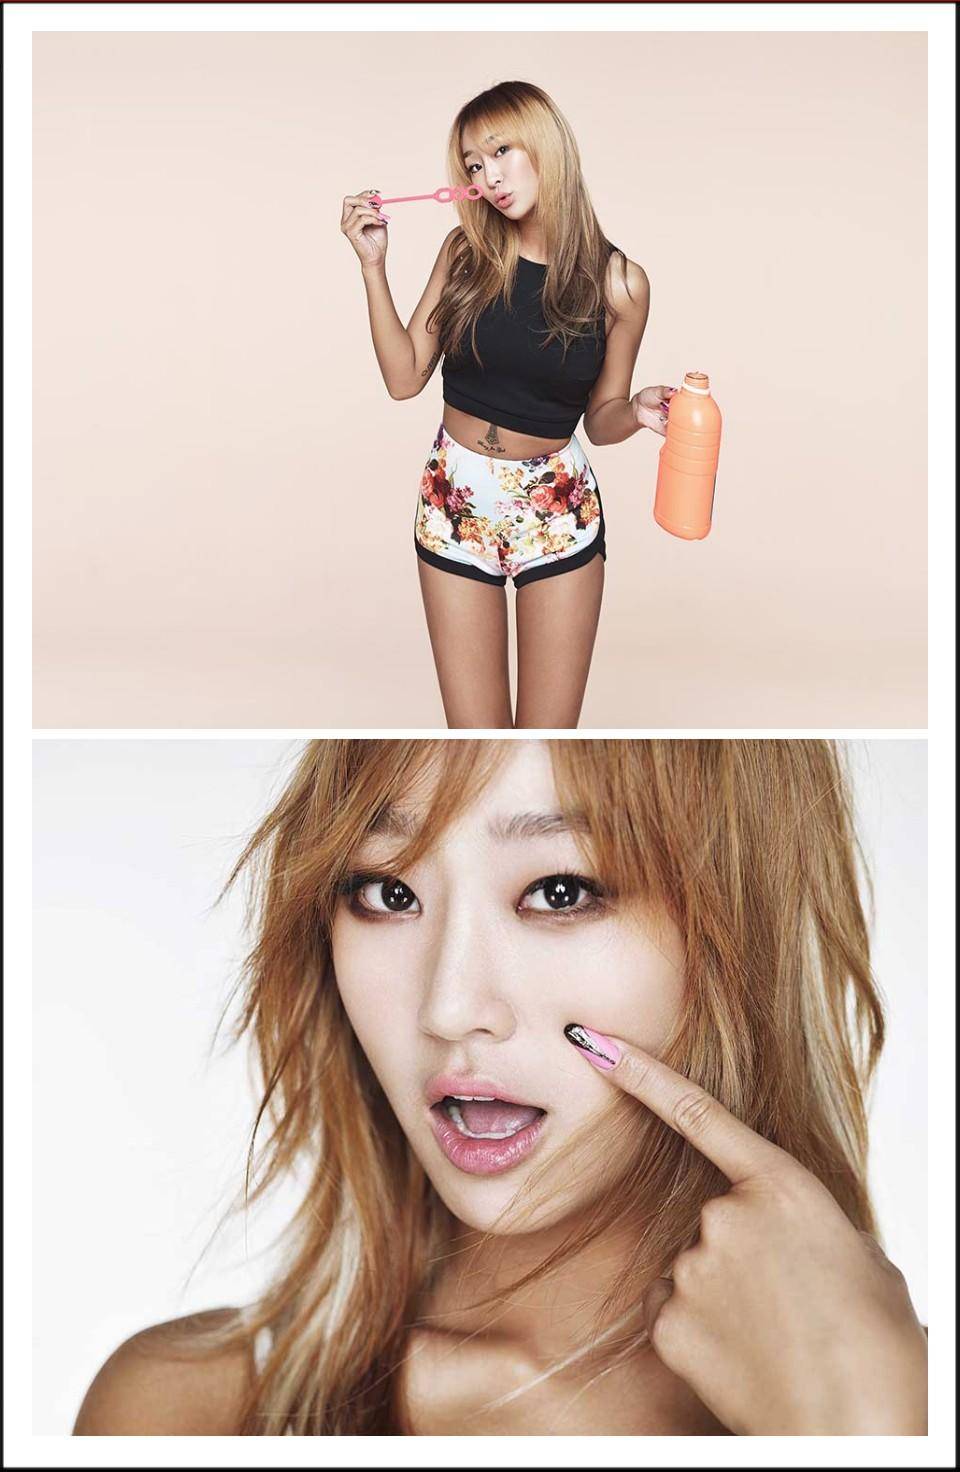 Sistars hyorin is sexy and flirty in touch my body teaser images